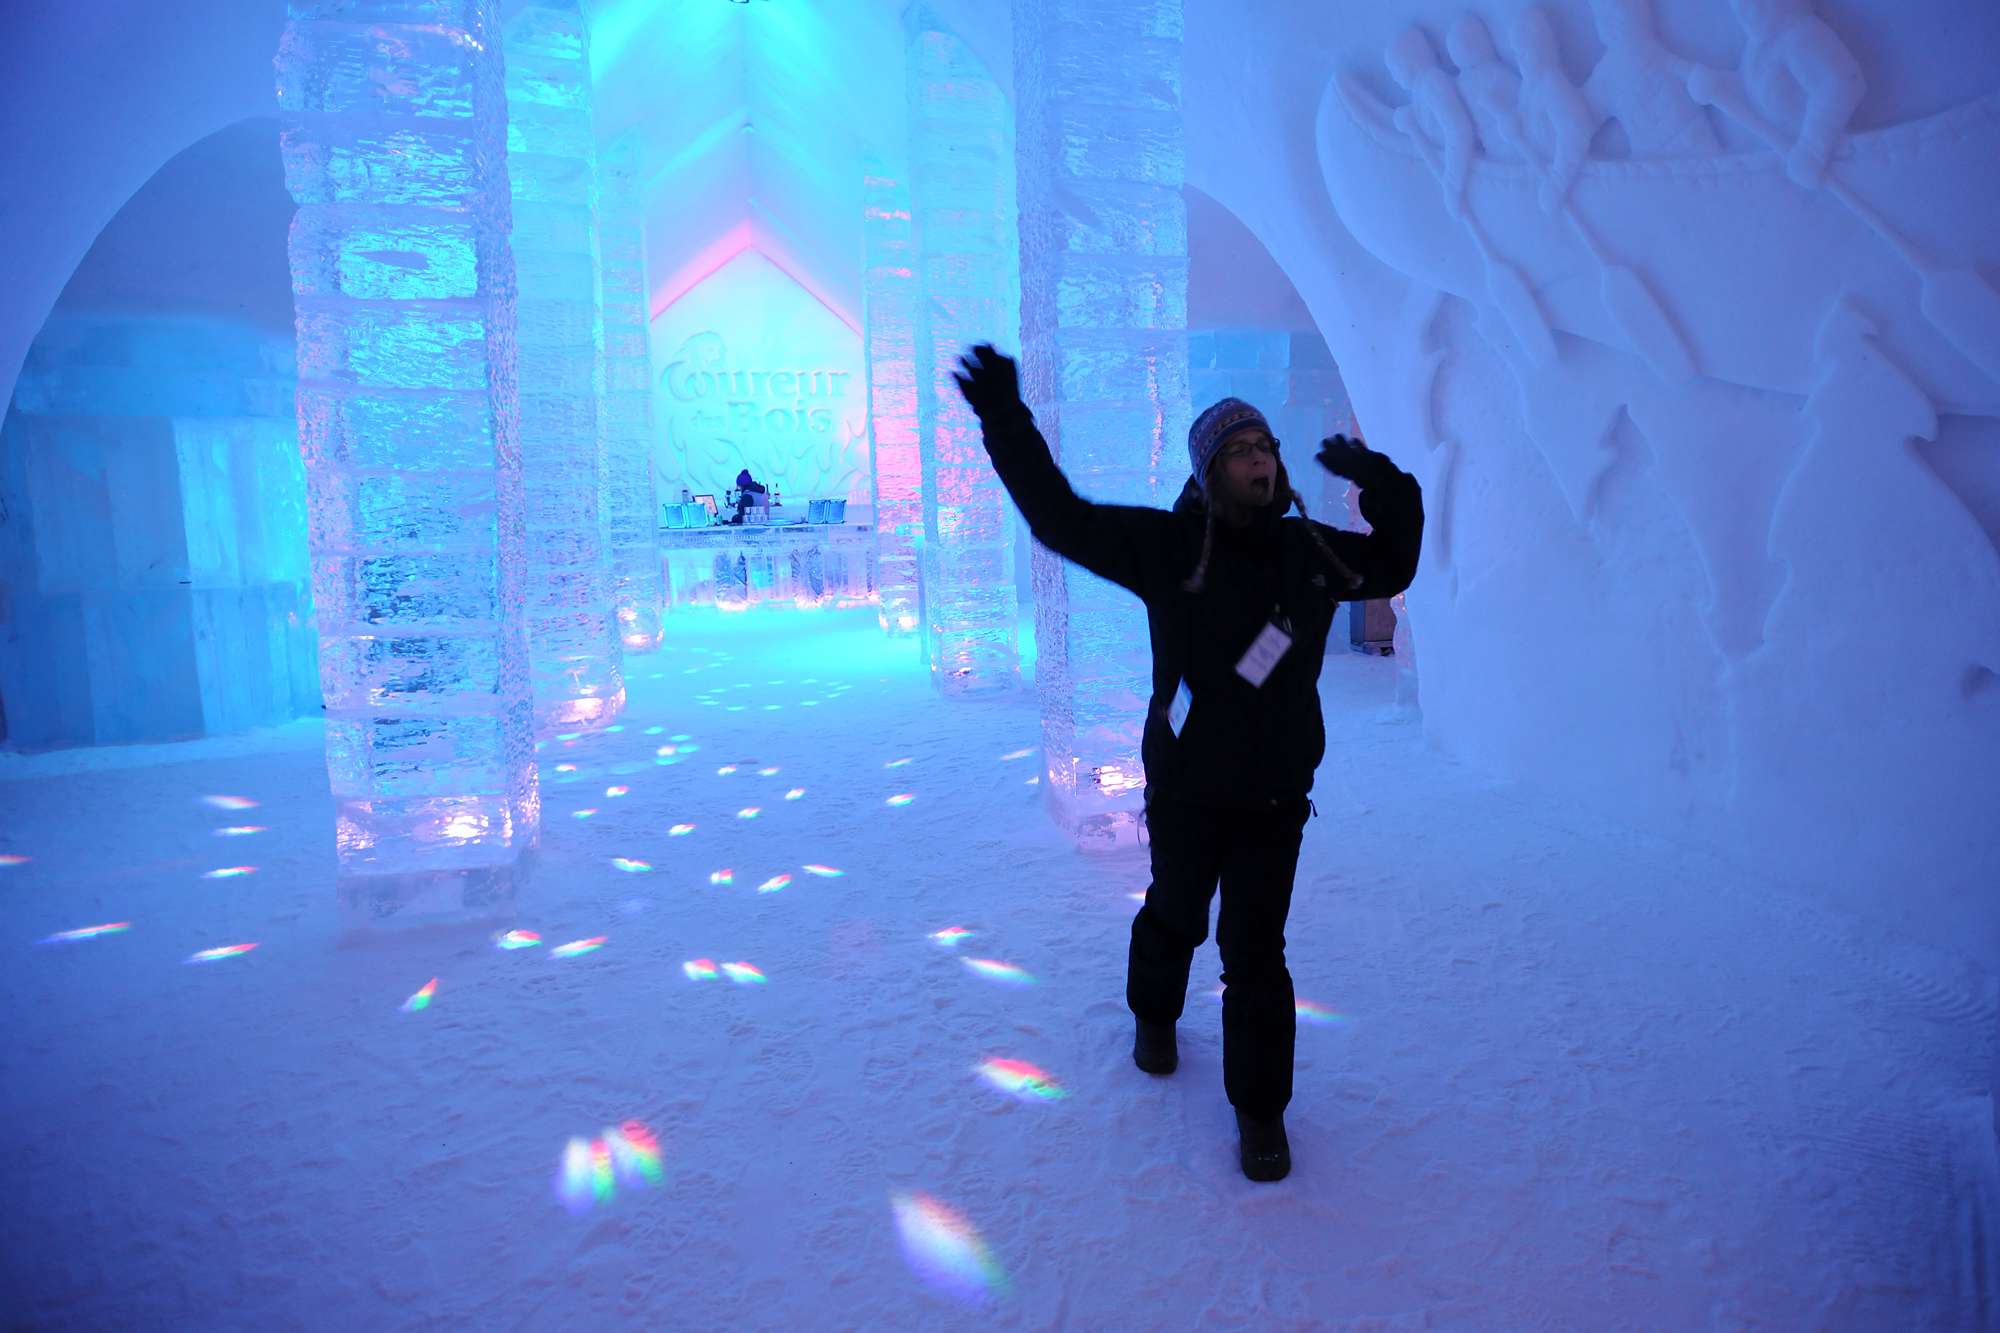 M gettin' her groove on, arctic style.